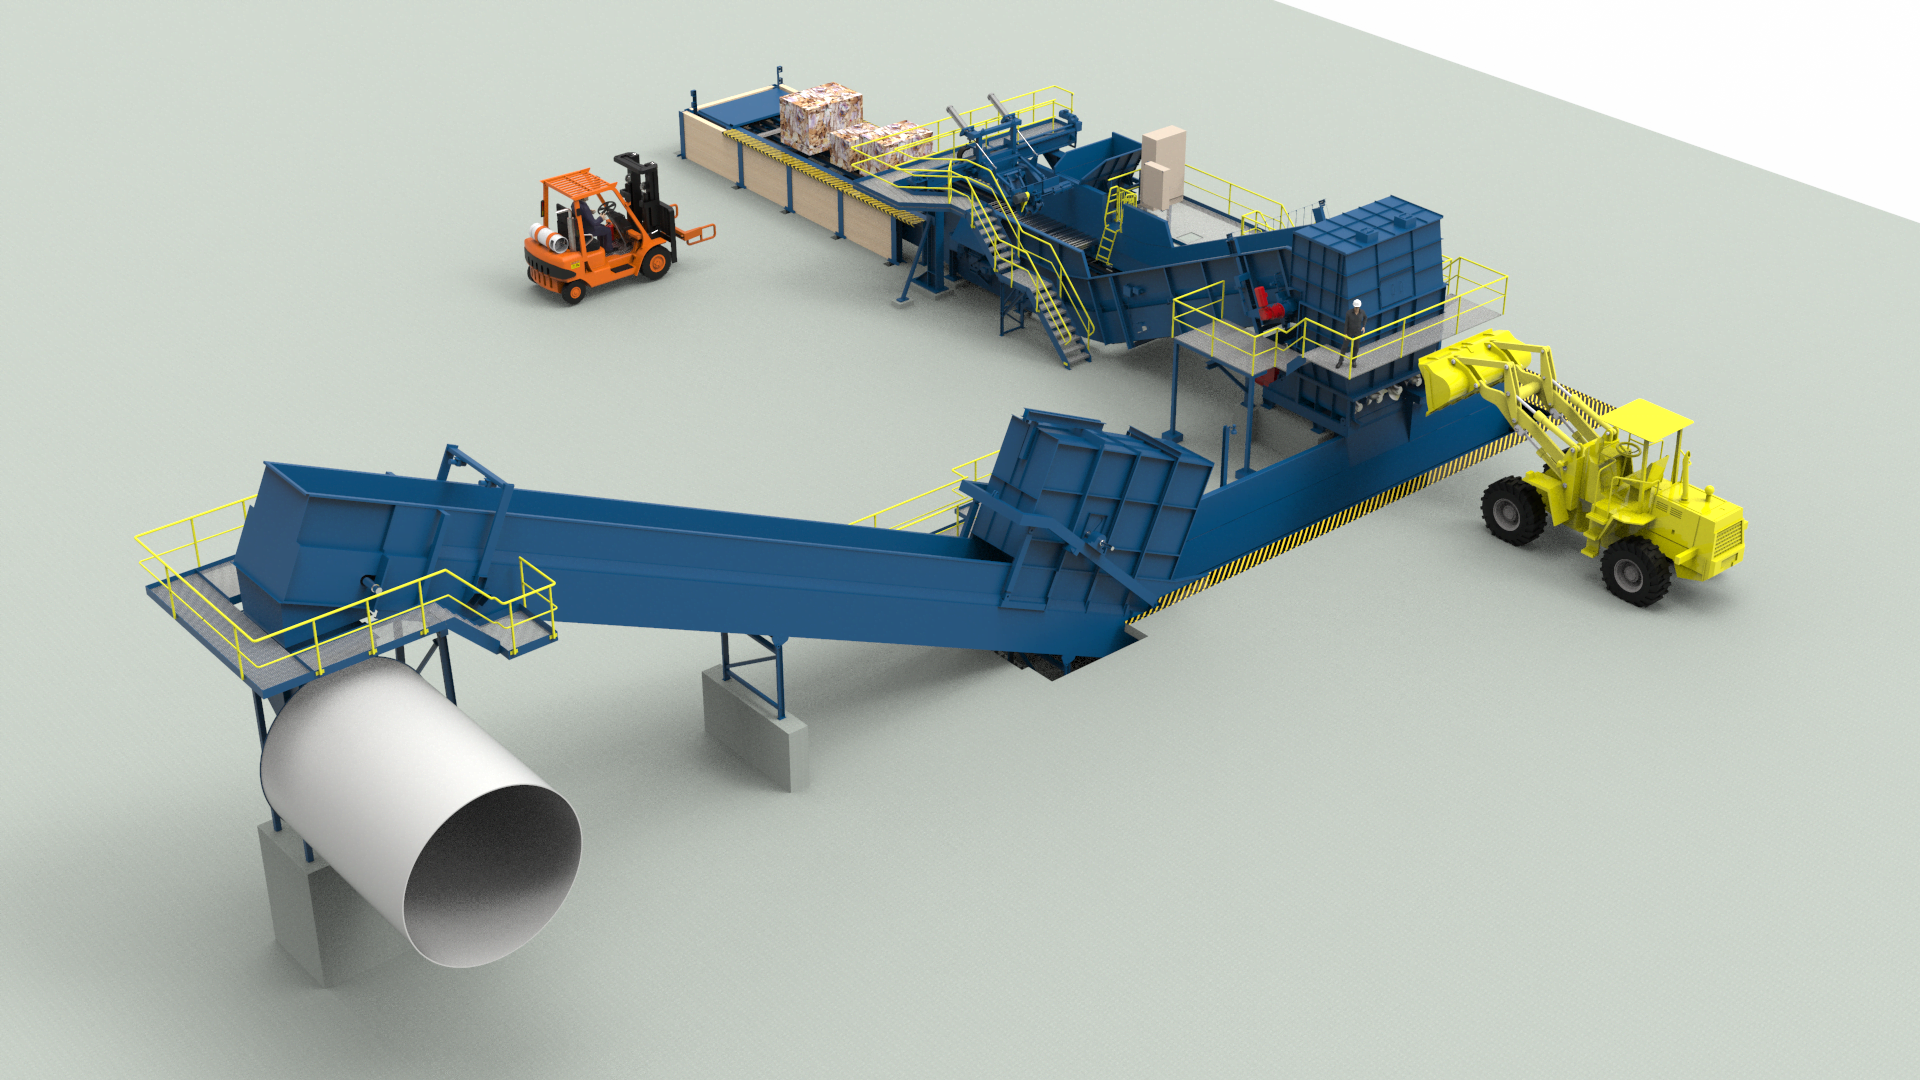 FMW Wastepaper Handling full process as an example